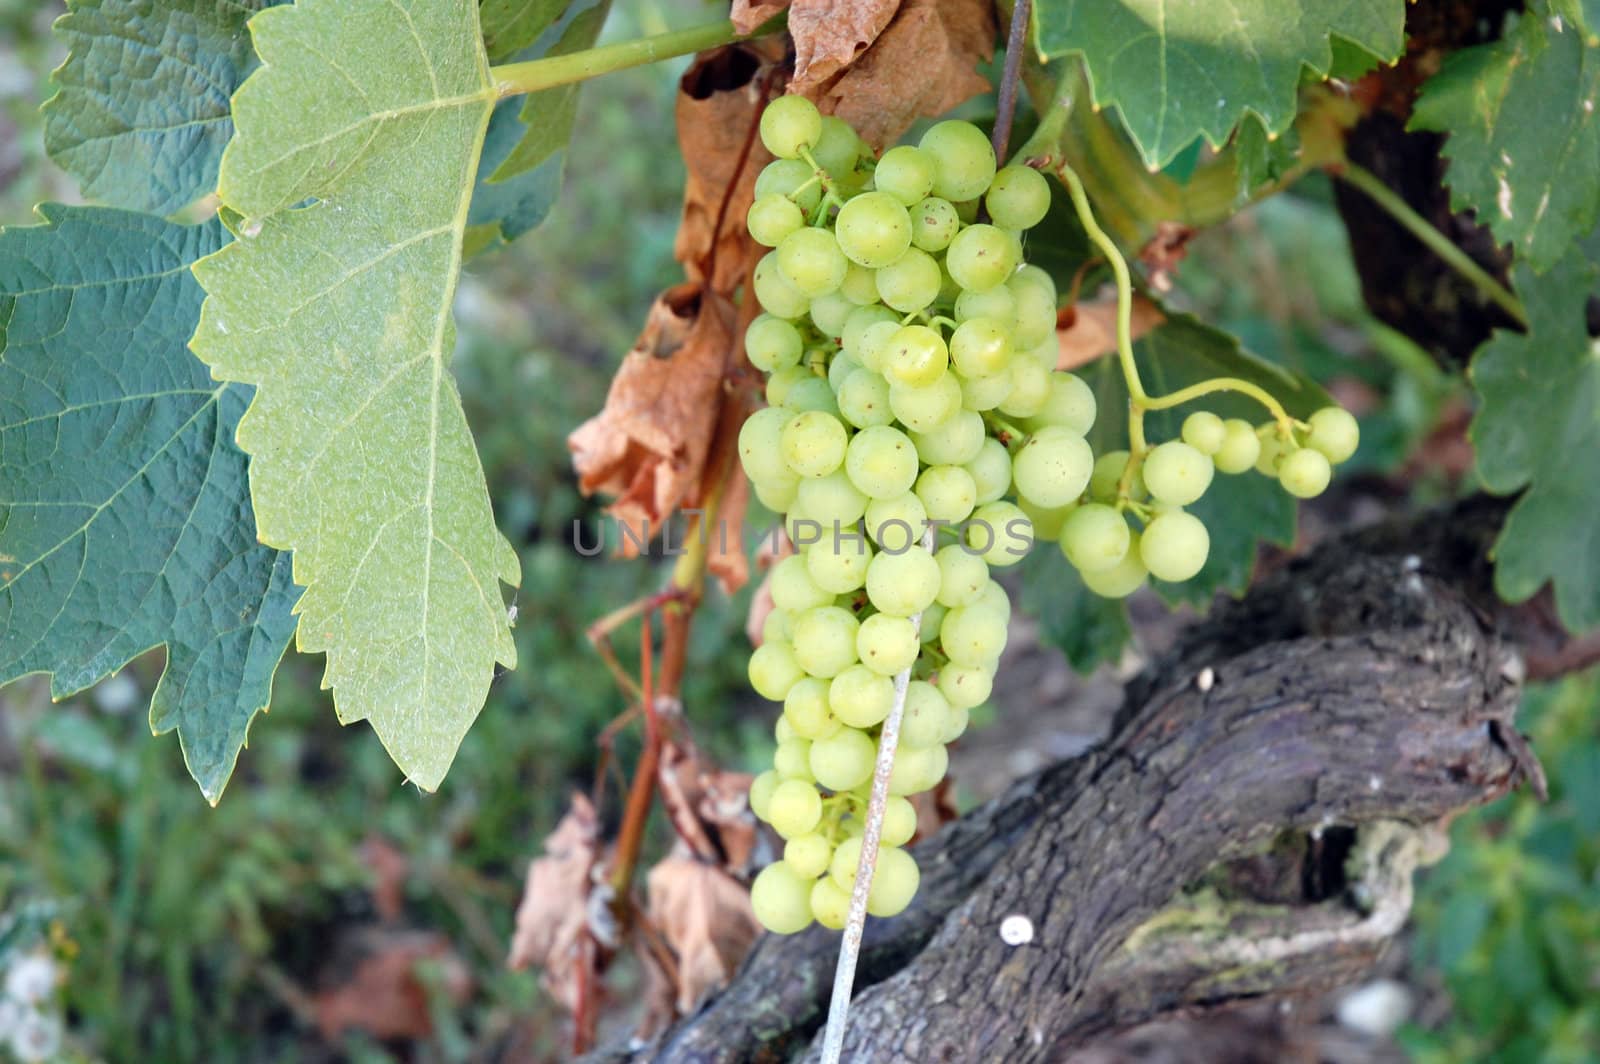 Shot of green grapes growing on tree in france